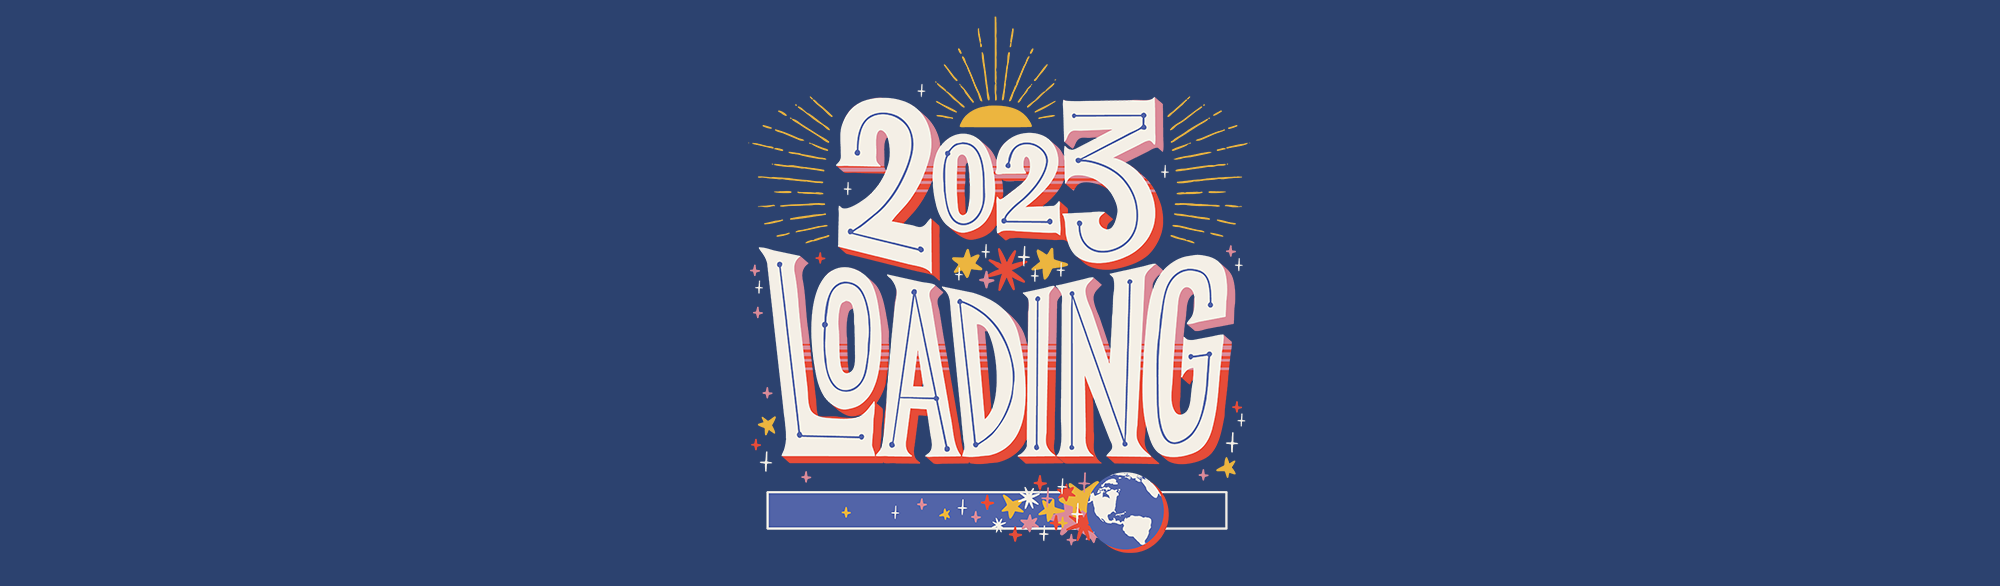 Loading 2023 - Featured Image